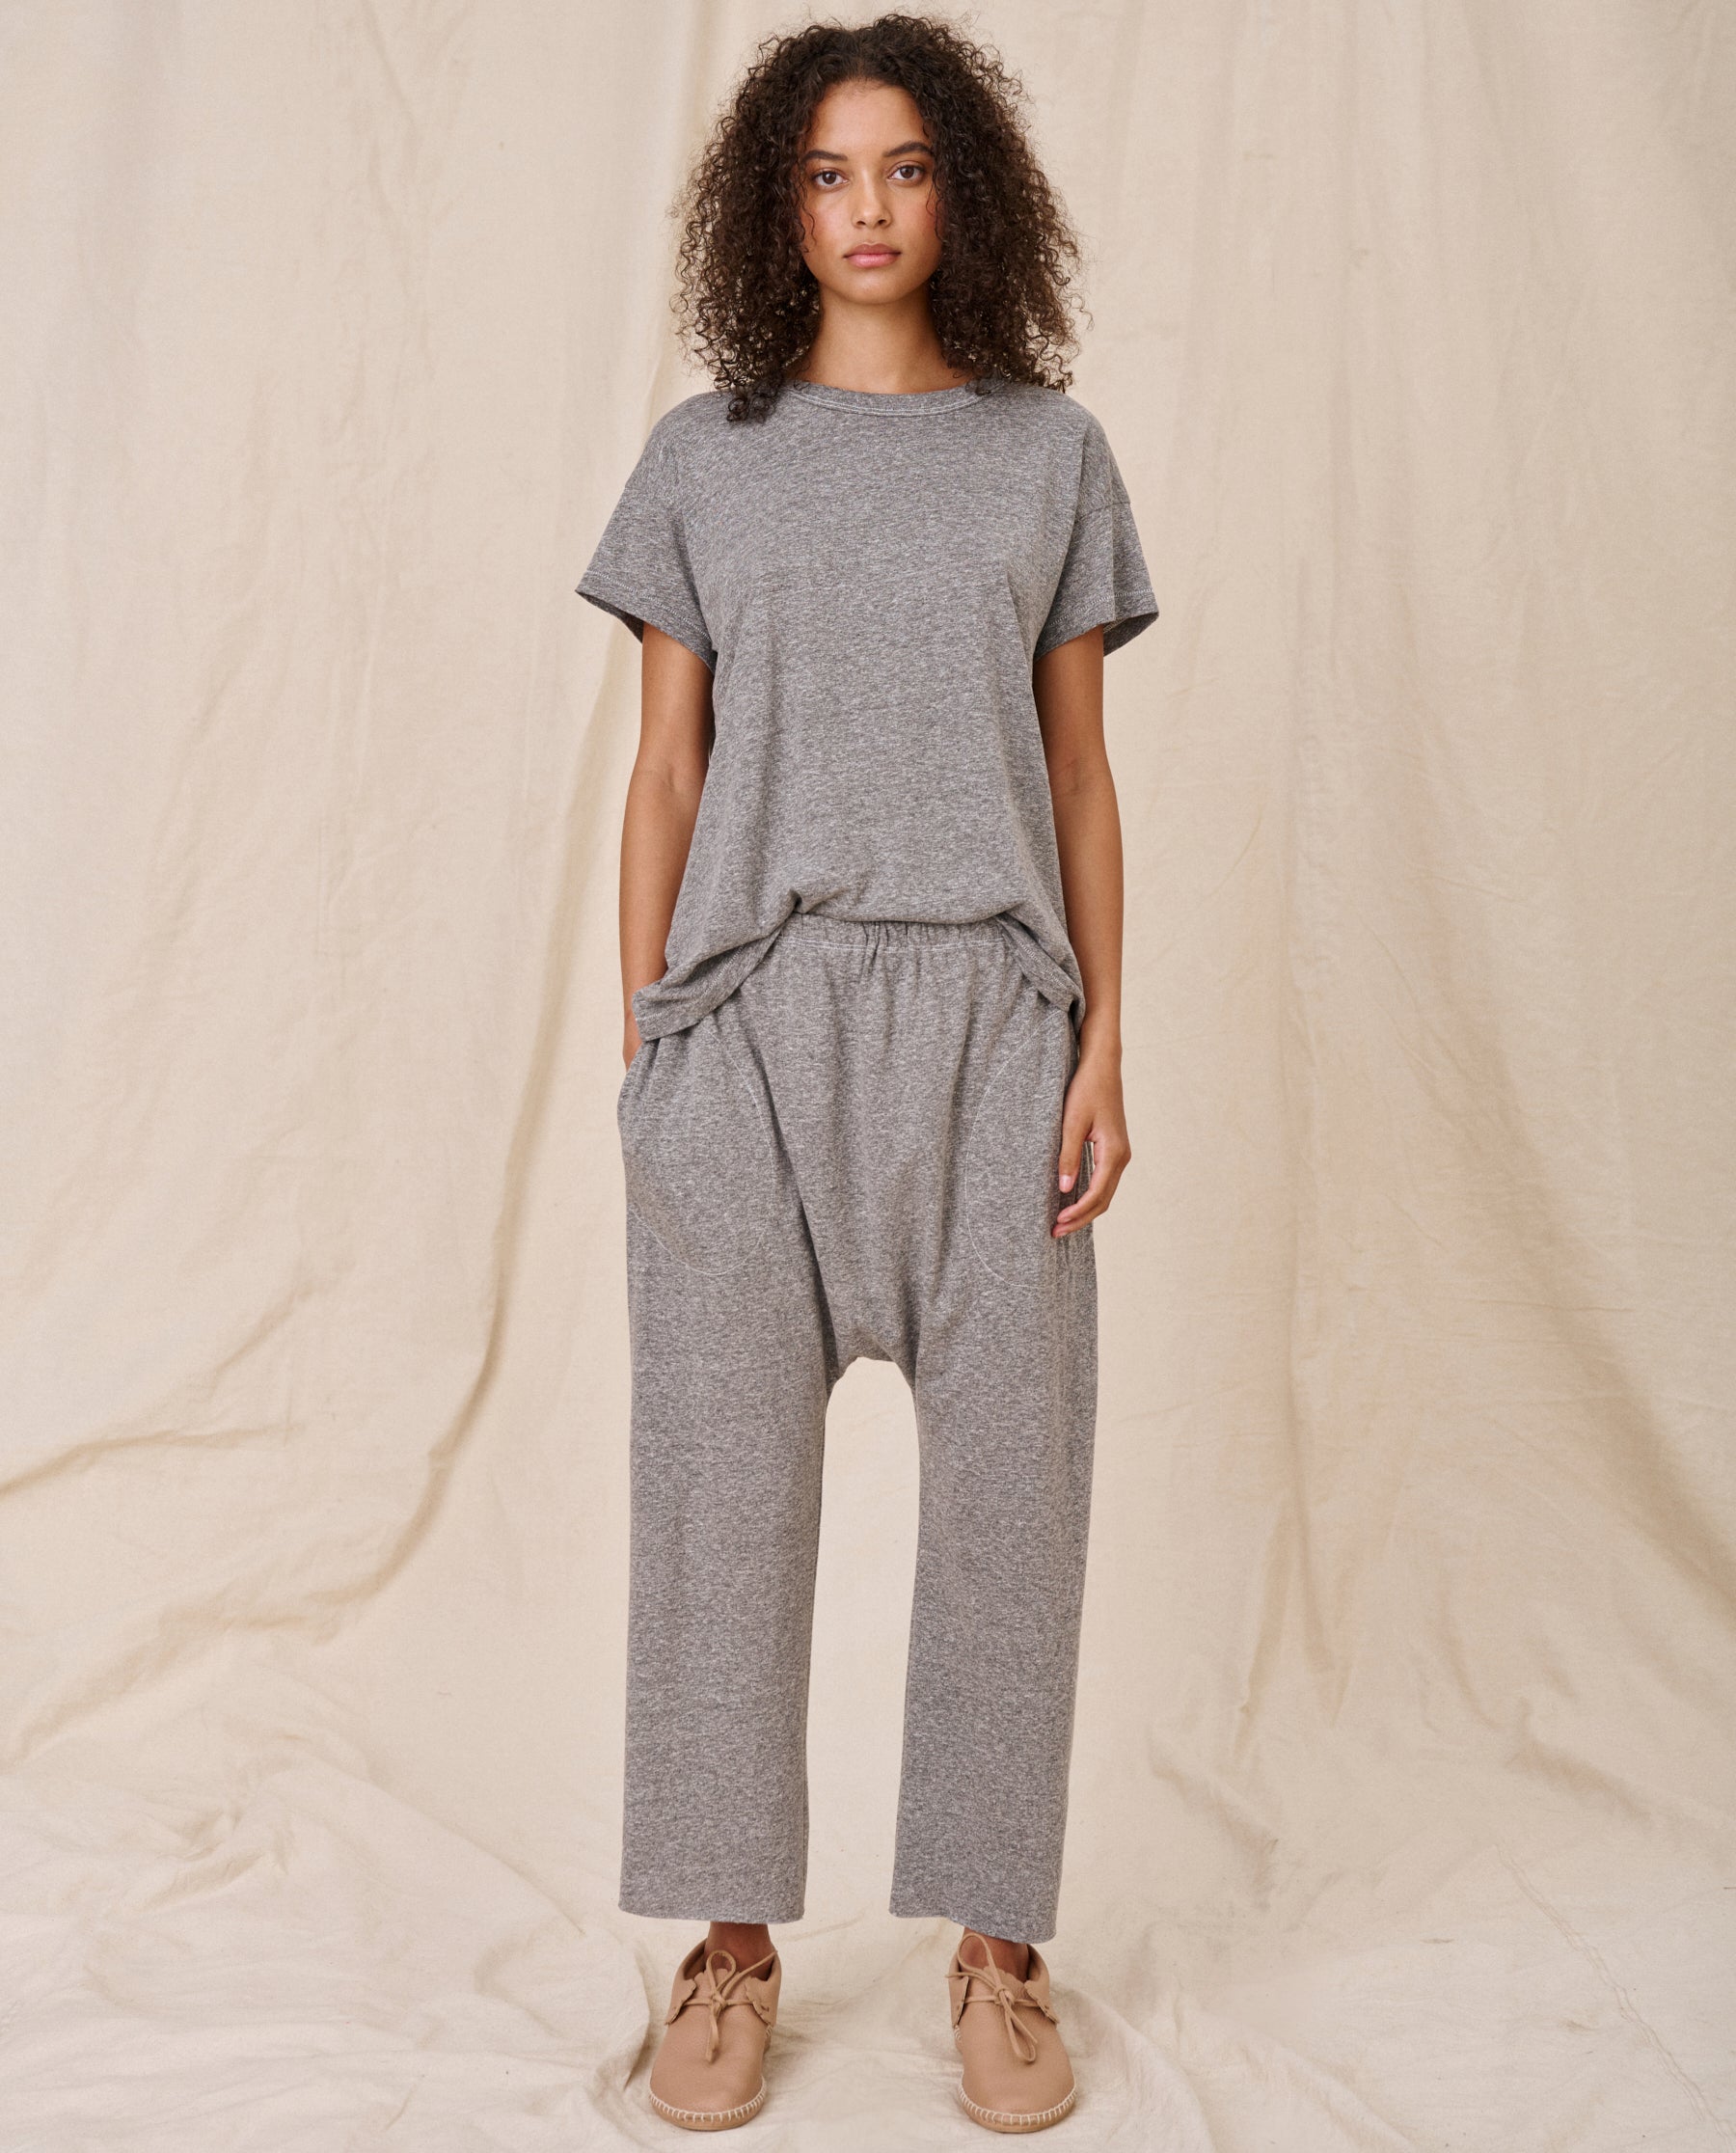 The Boxy Crew. Solid -- Heather Grey